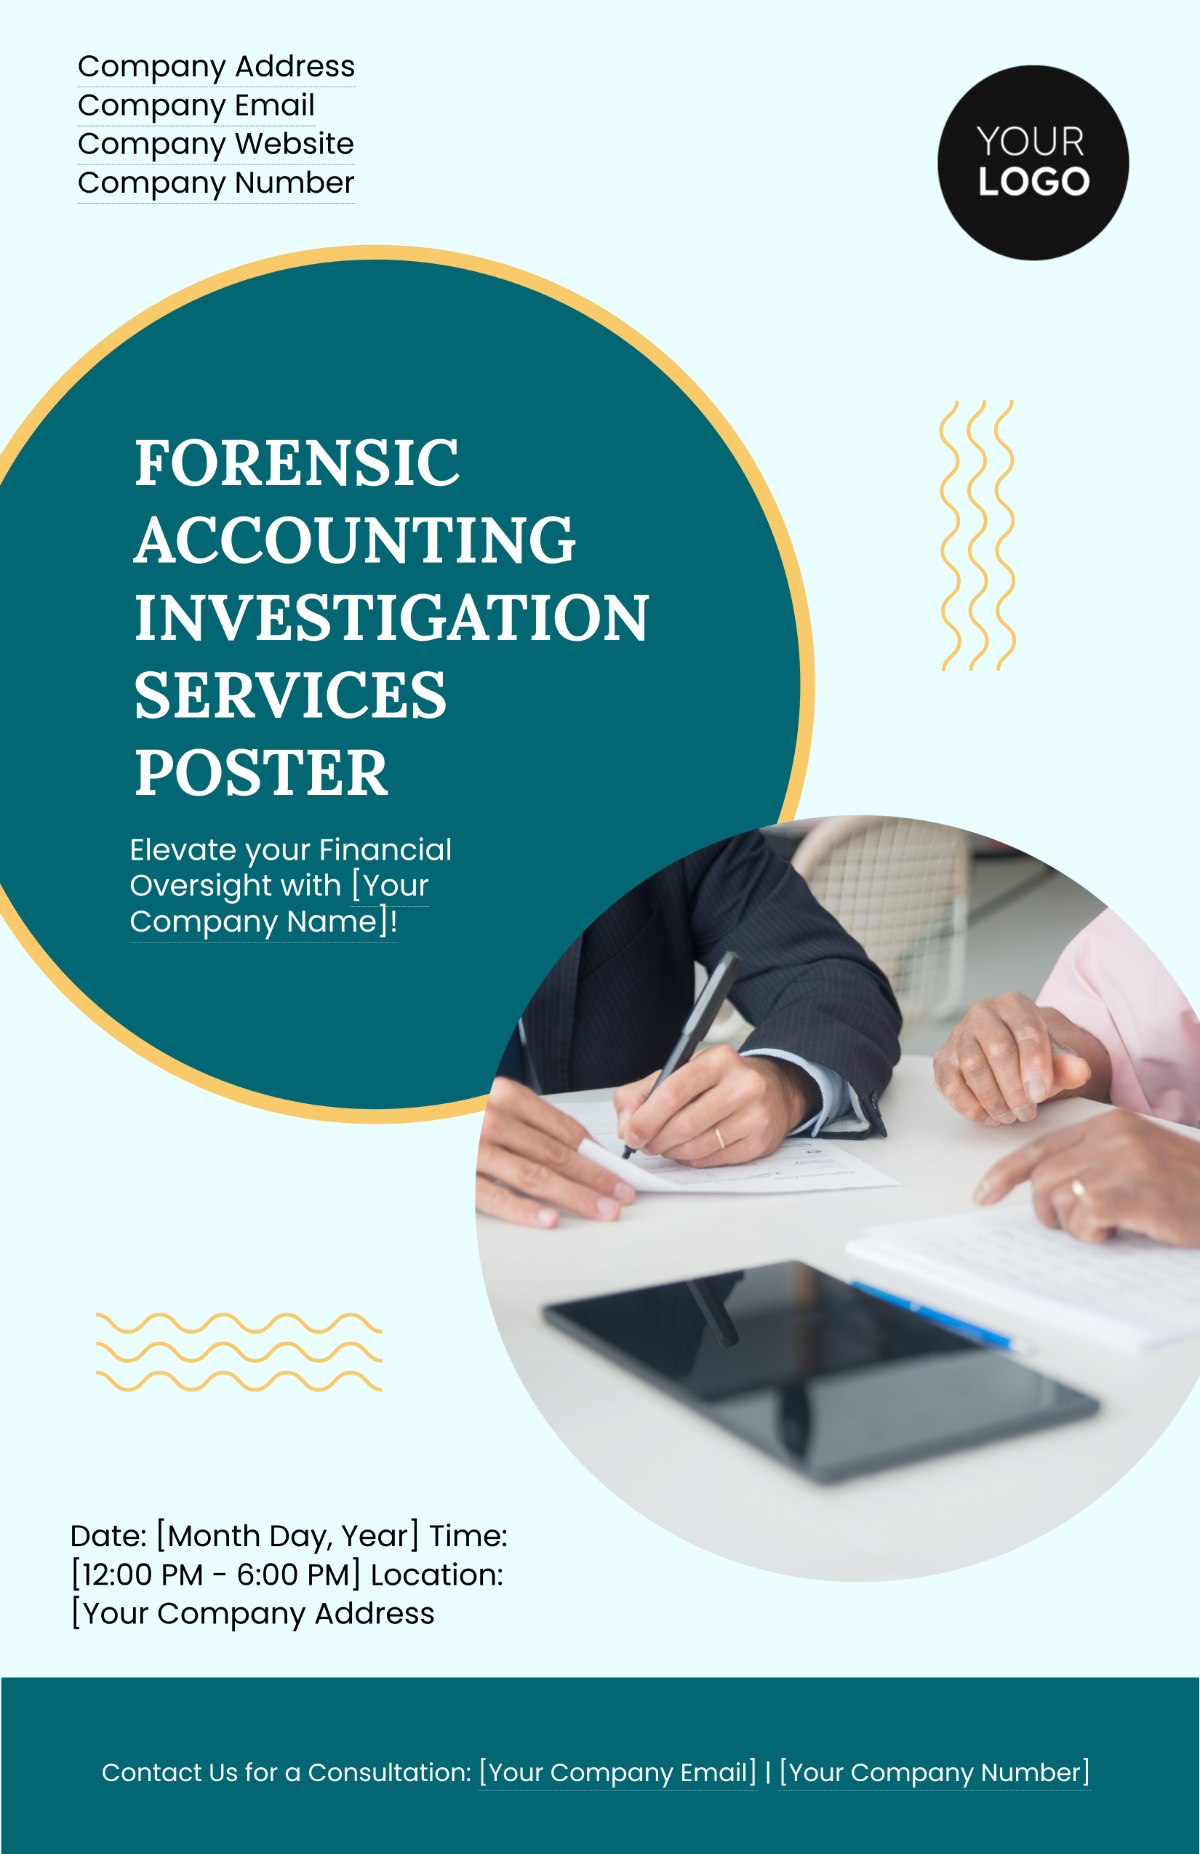 Forensic Accounting Investigation Services Poster